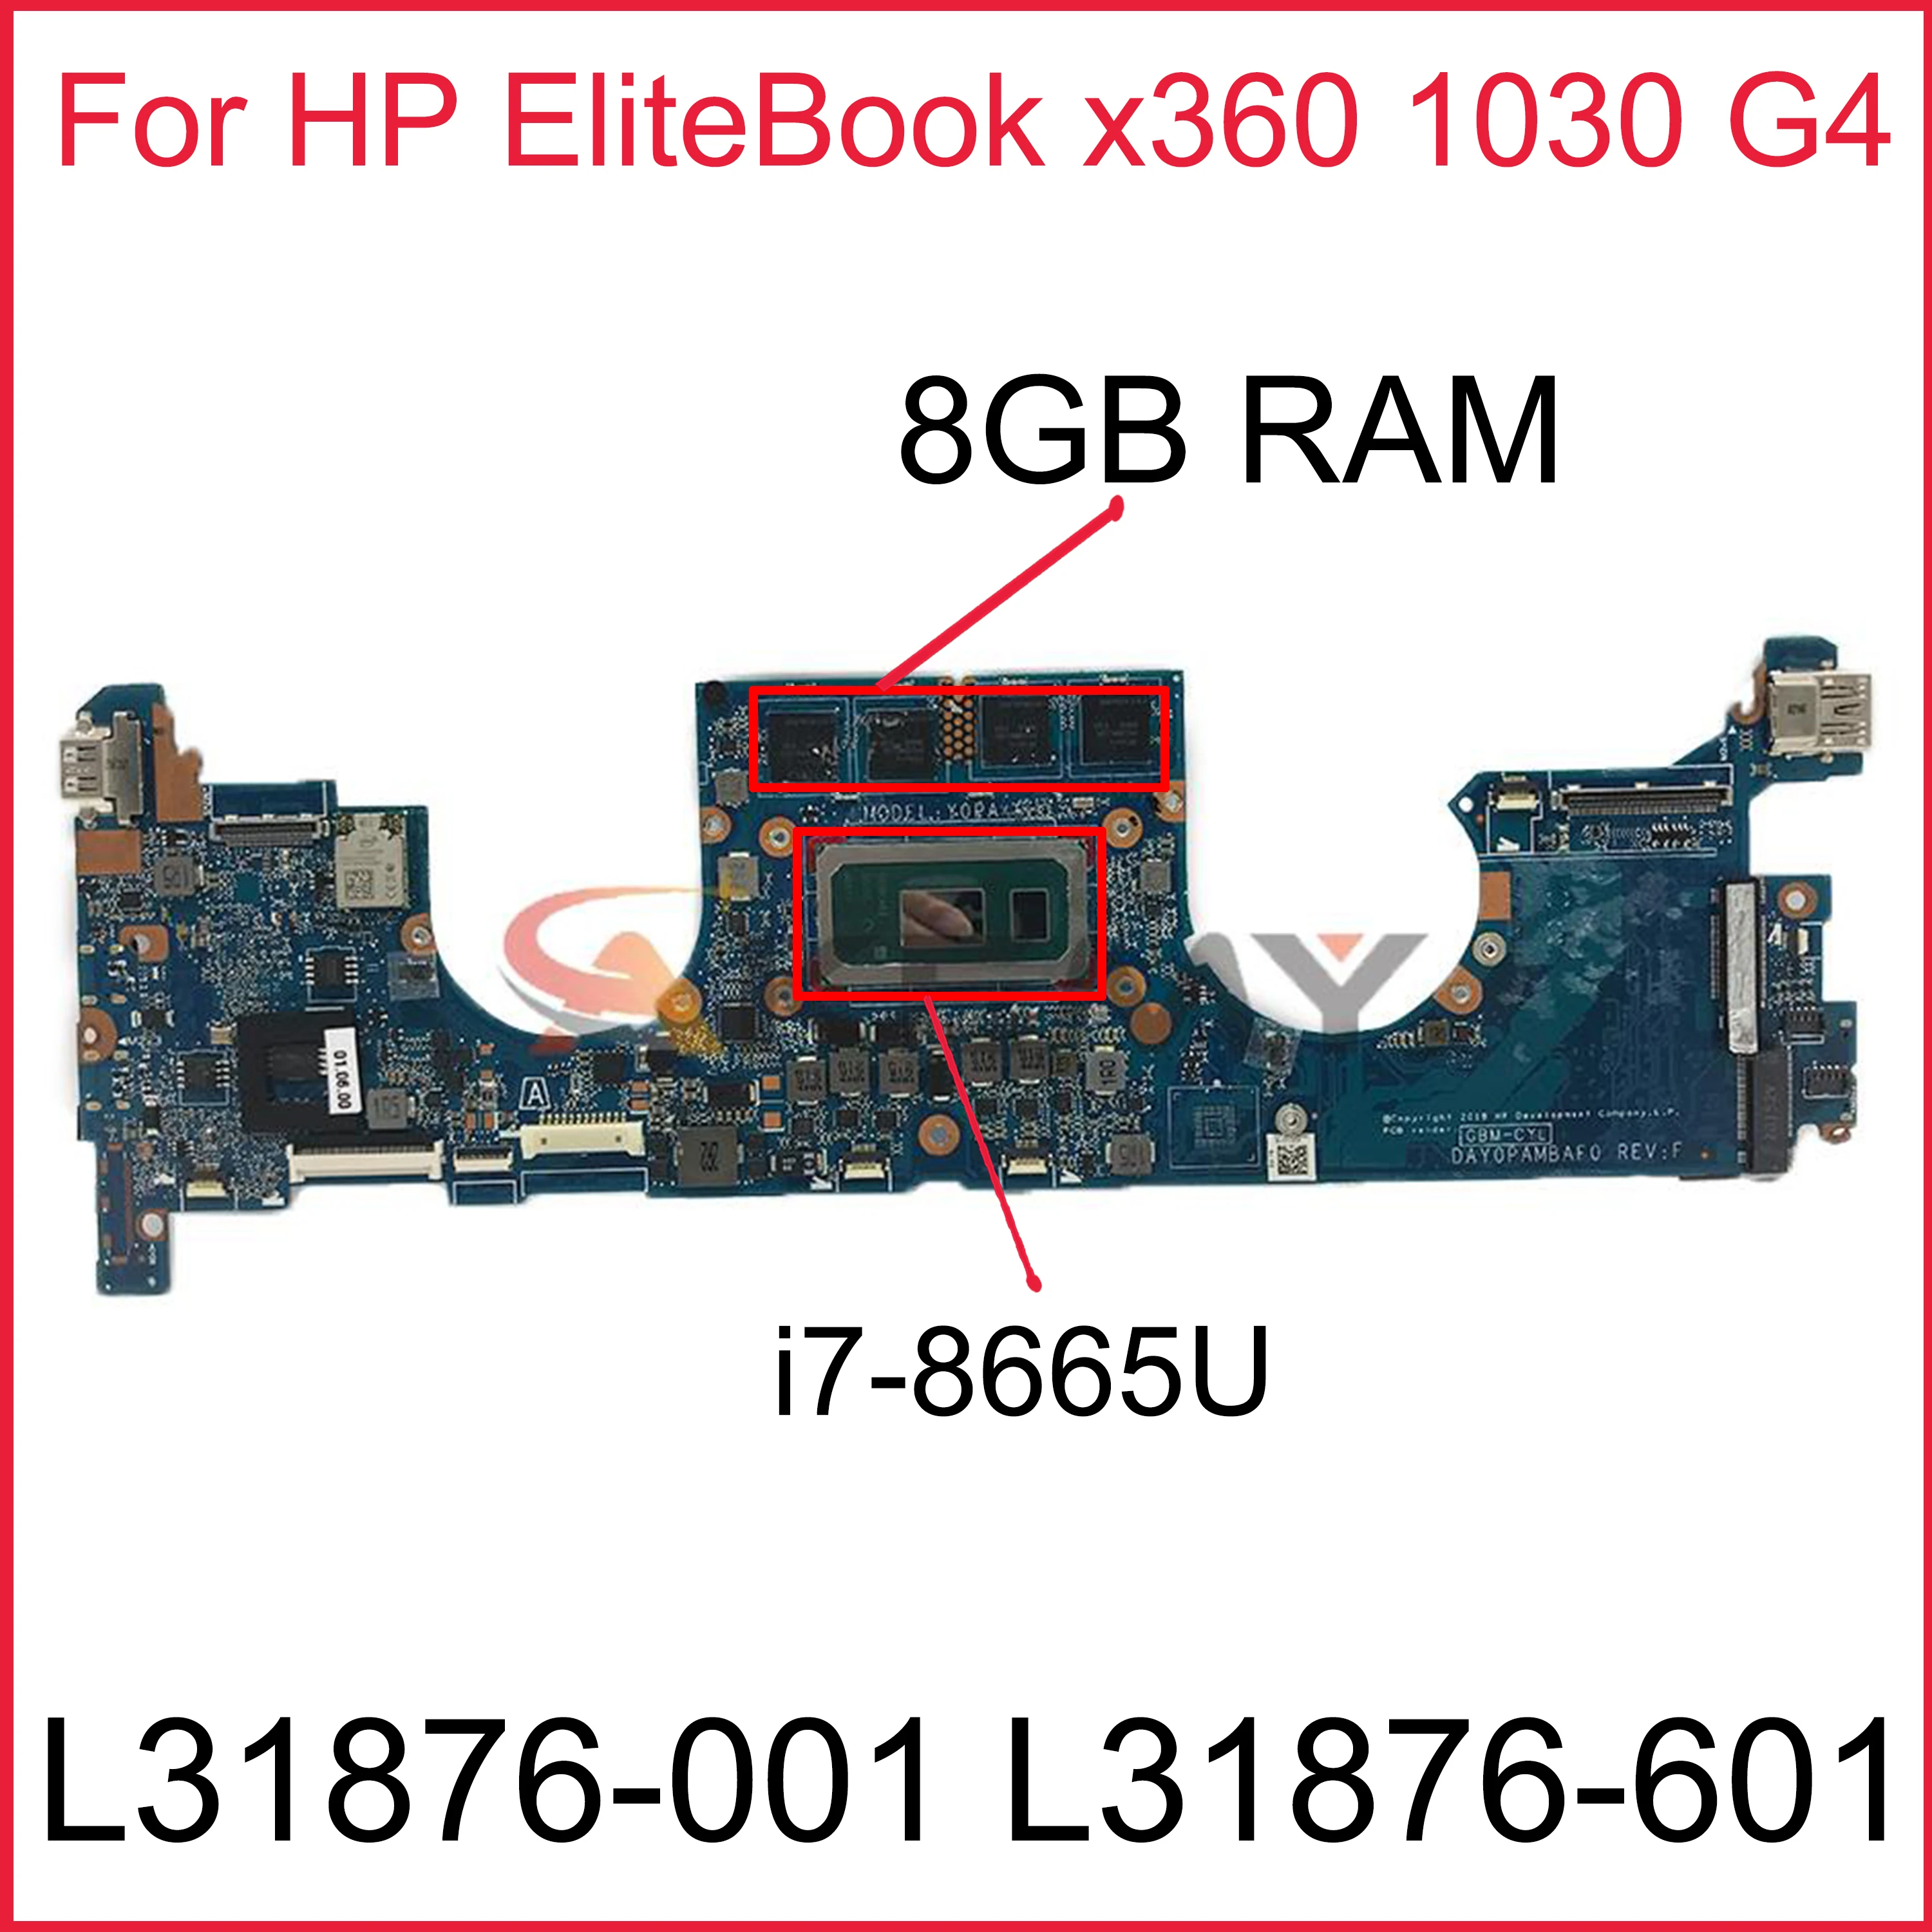 

For HP EliteBook x360 1030 G4 Laptop NoteBook PC Motherboard DAY0PAMBAF0 Y0PA With SRF9W i7-8665U 8GB RAM Fully Tested OK